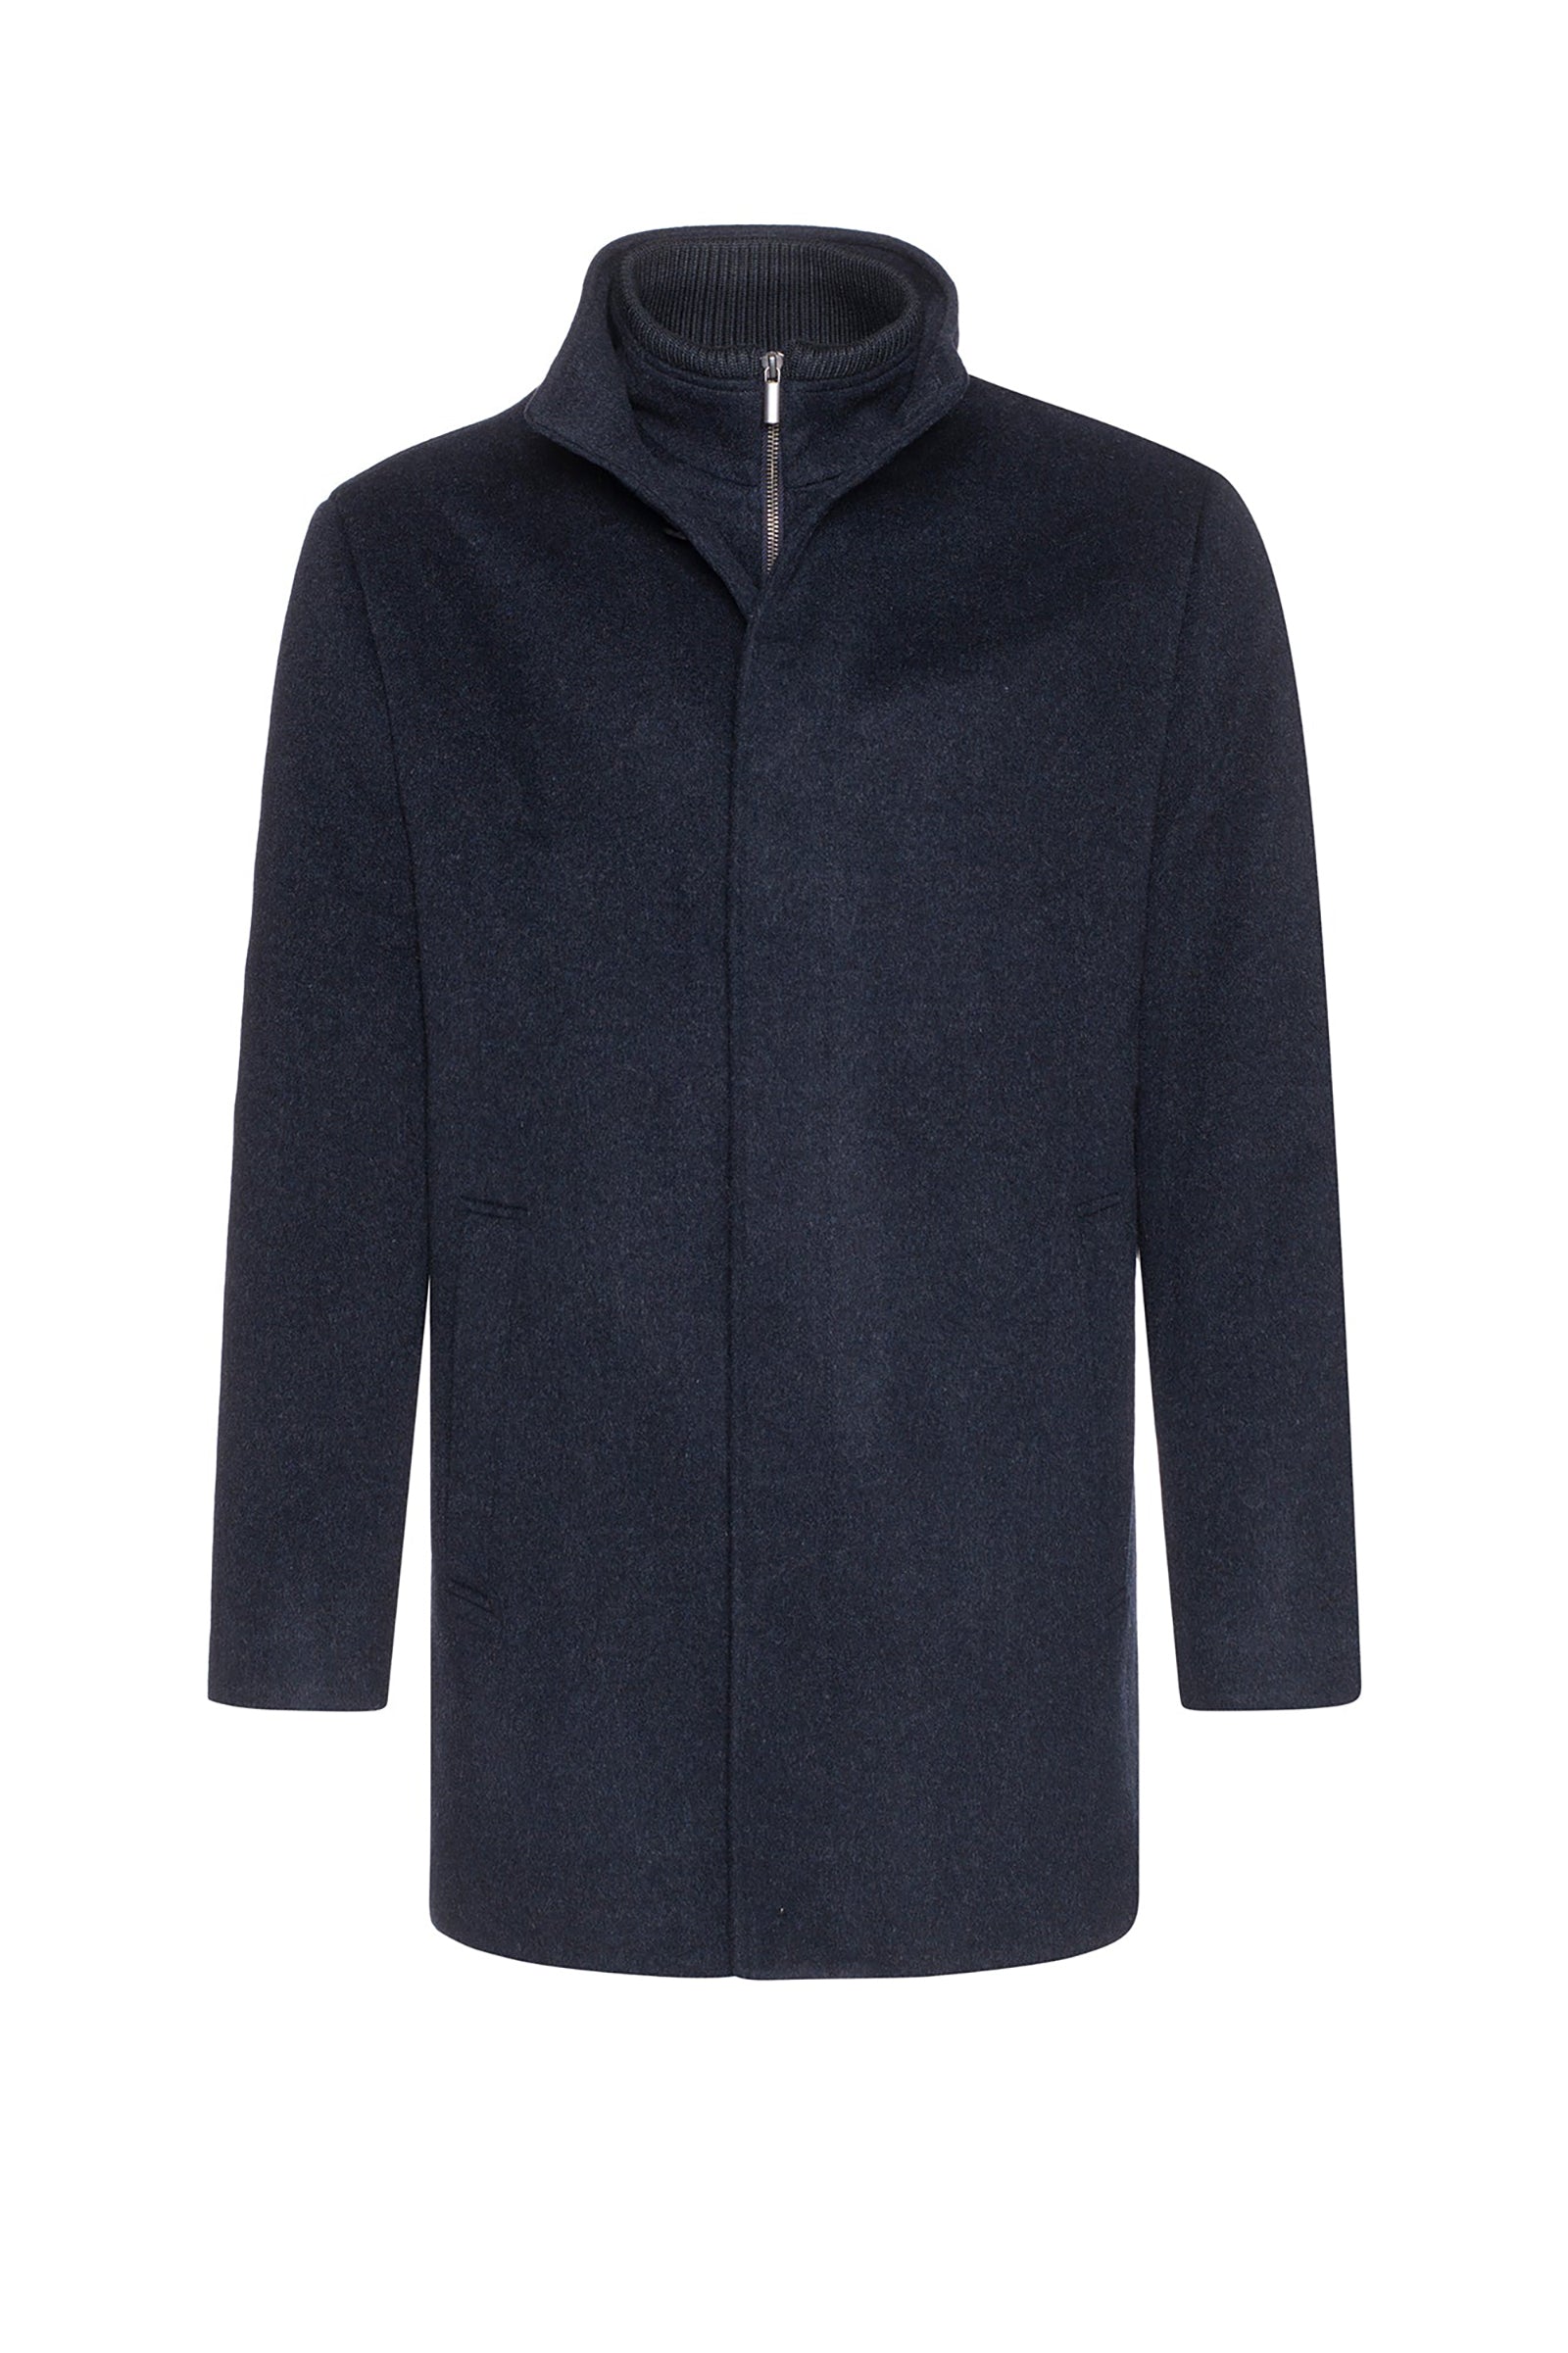  Mont-Royal - navy melange wool and cashmere topcoat 34 inch length